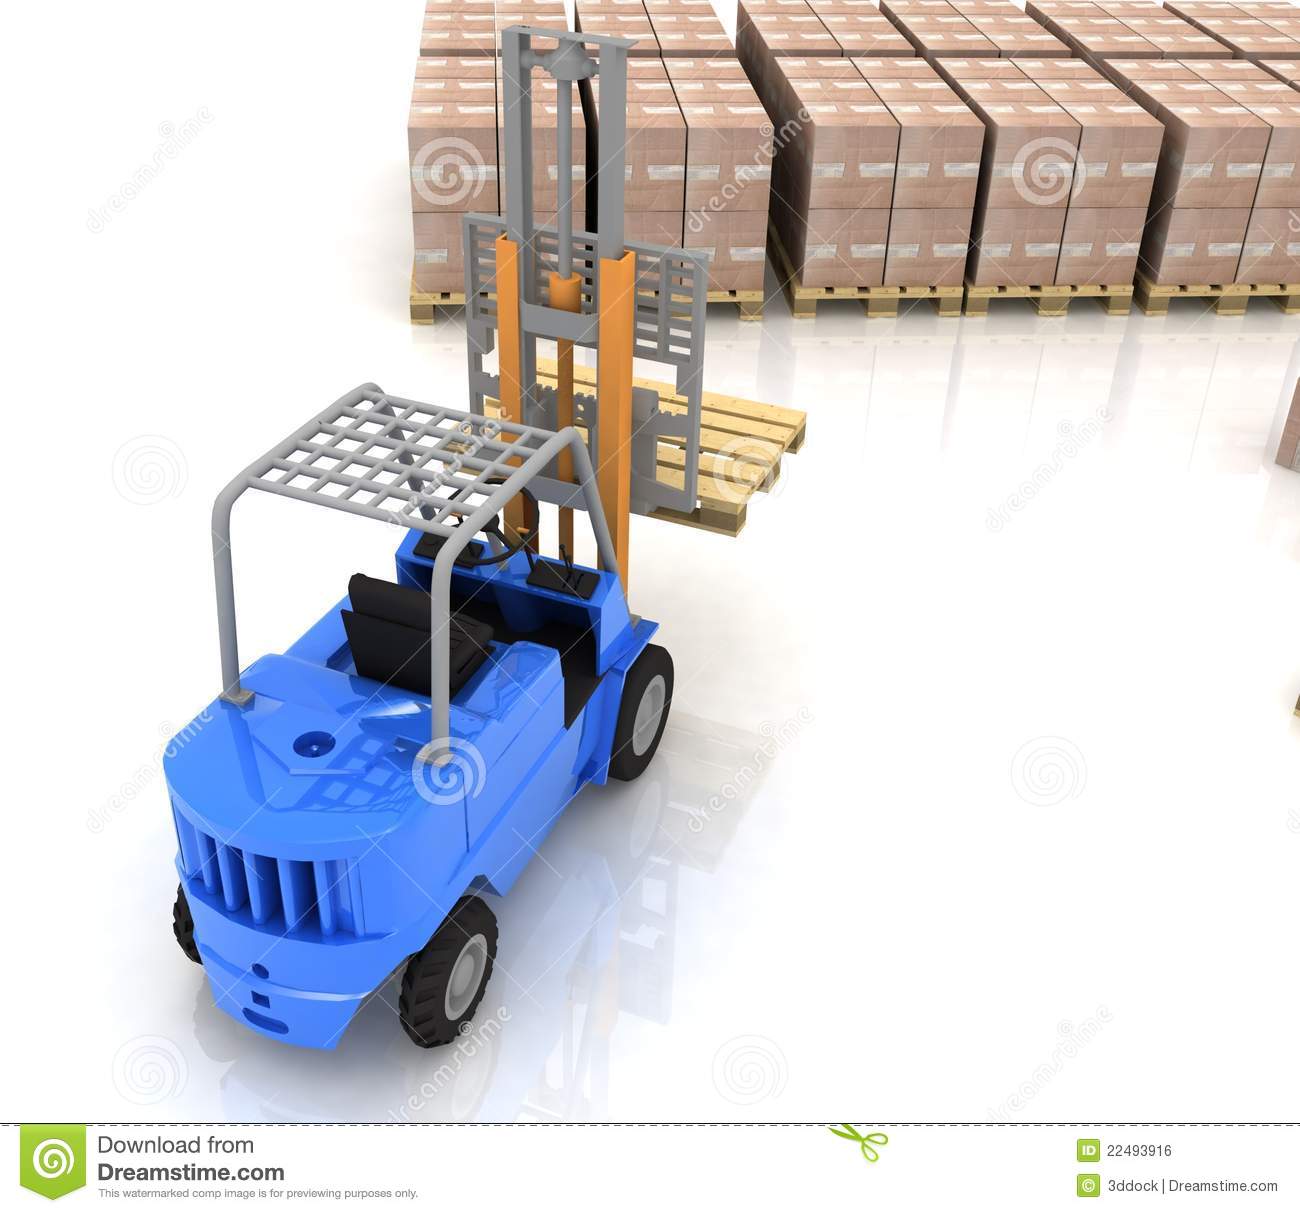 Loader In Warehouse With Pallet Royalty Free Stock Image   Image    